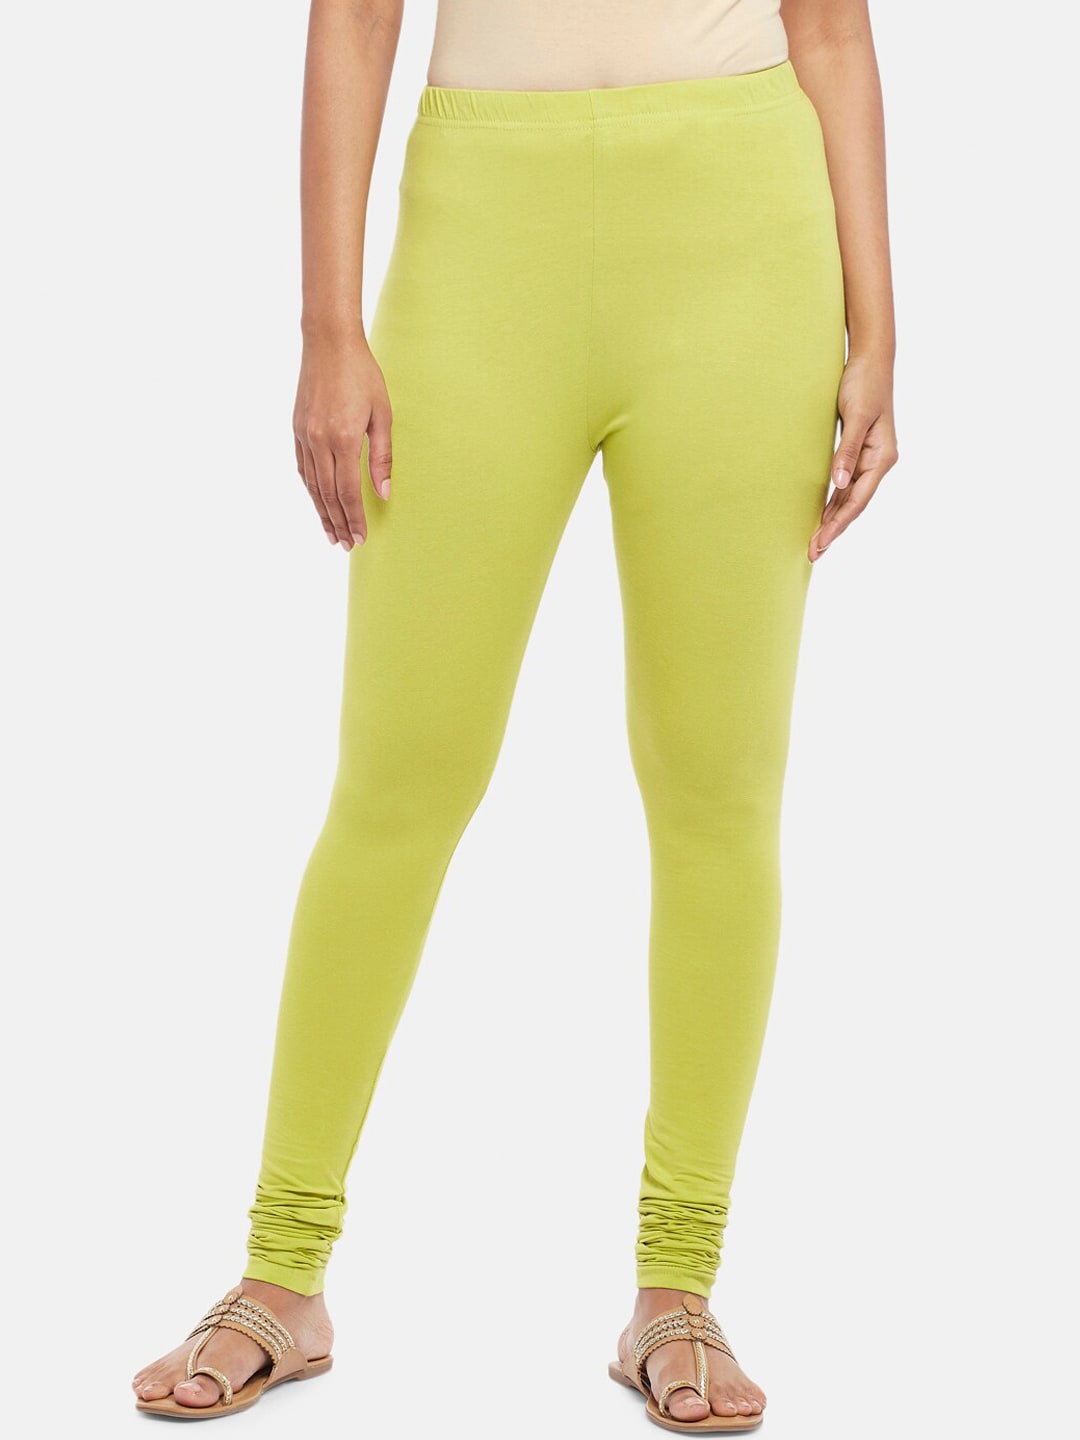 RANGMANCH BY PANTALOONS Lime Green Solid Leggings Price in India